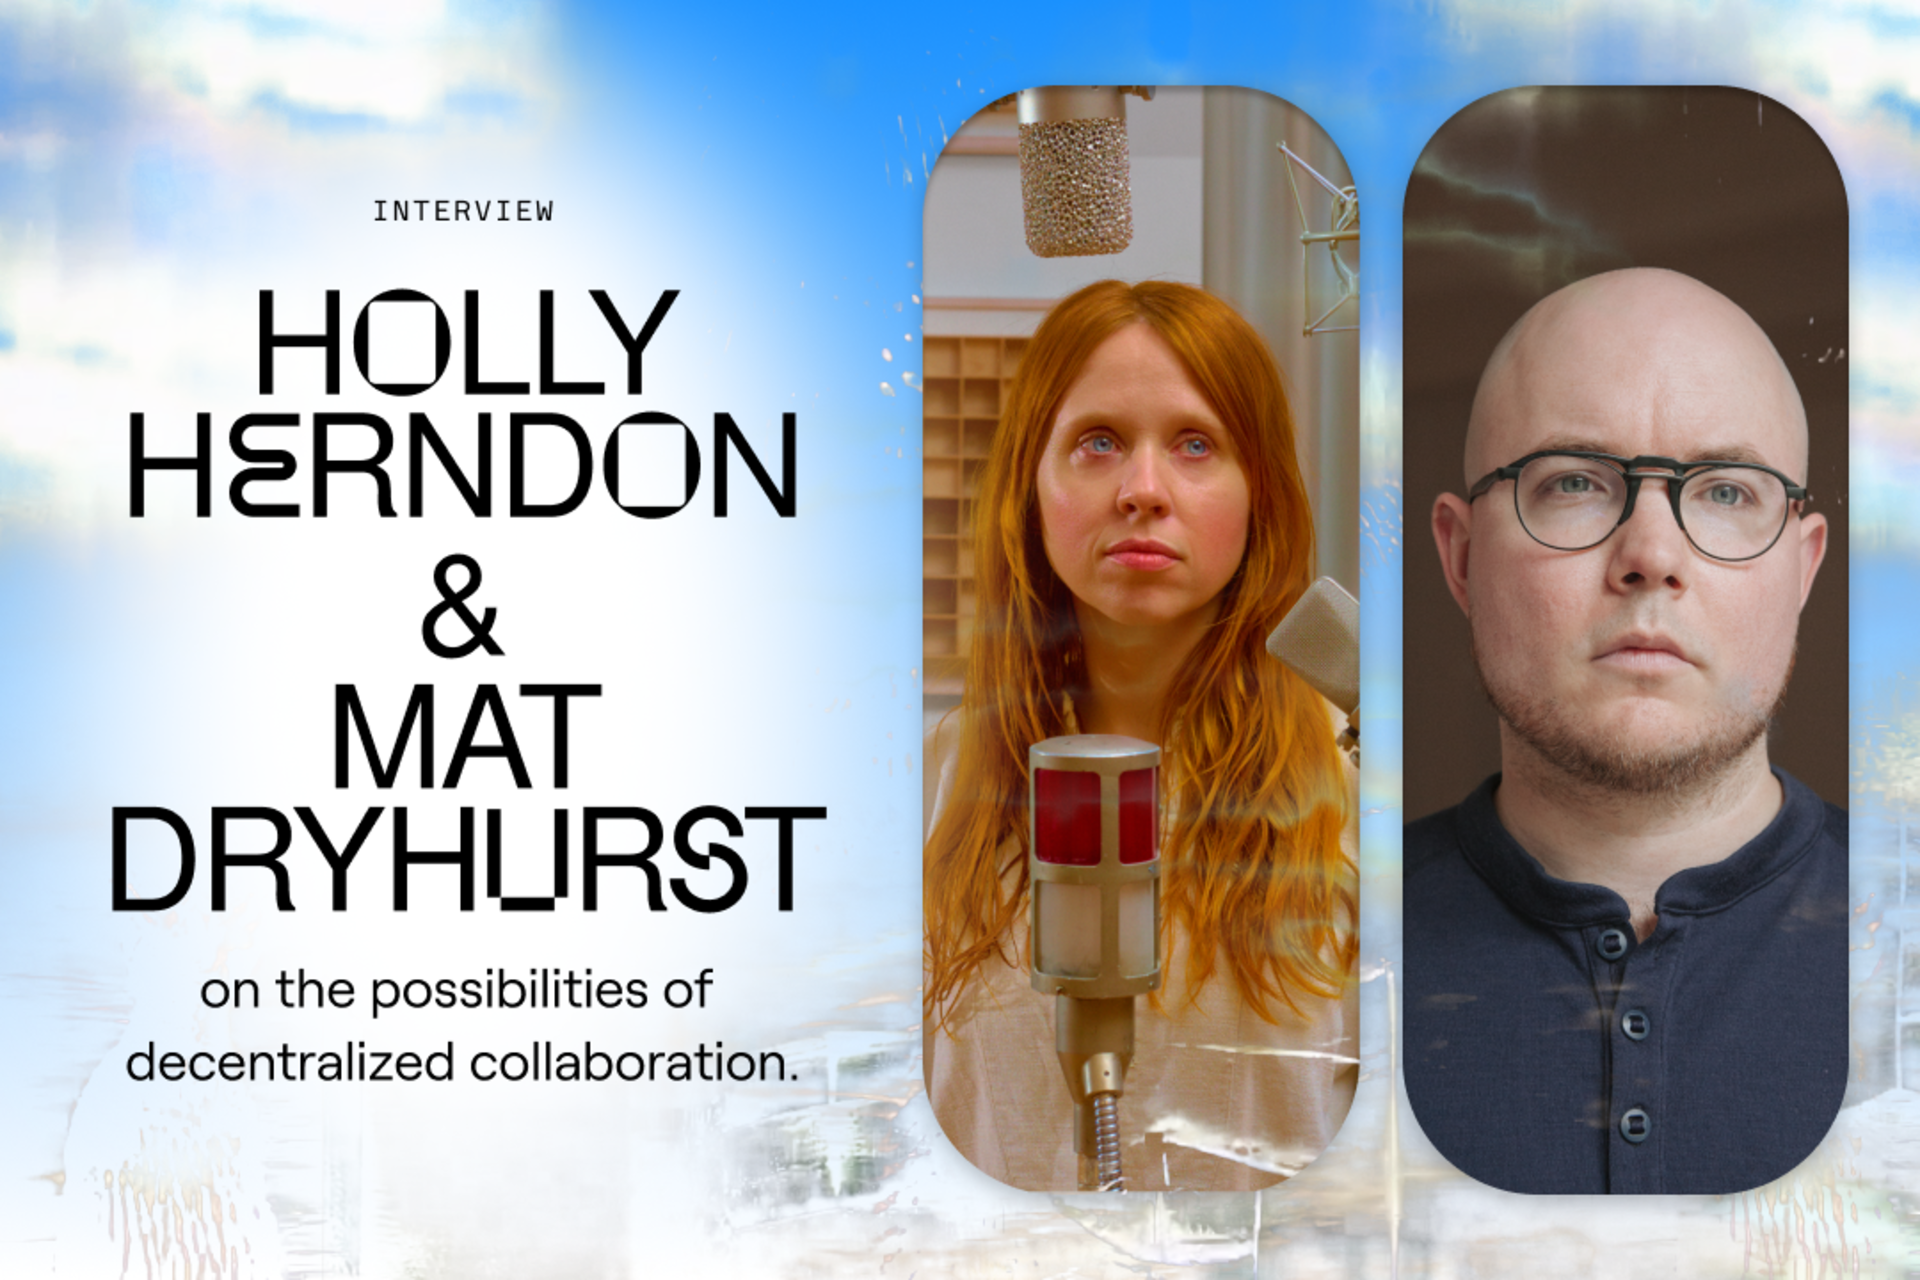 Holly Herndon and Mat Dryhurst on the dreamy possibilities of decentralized collaboration.